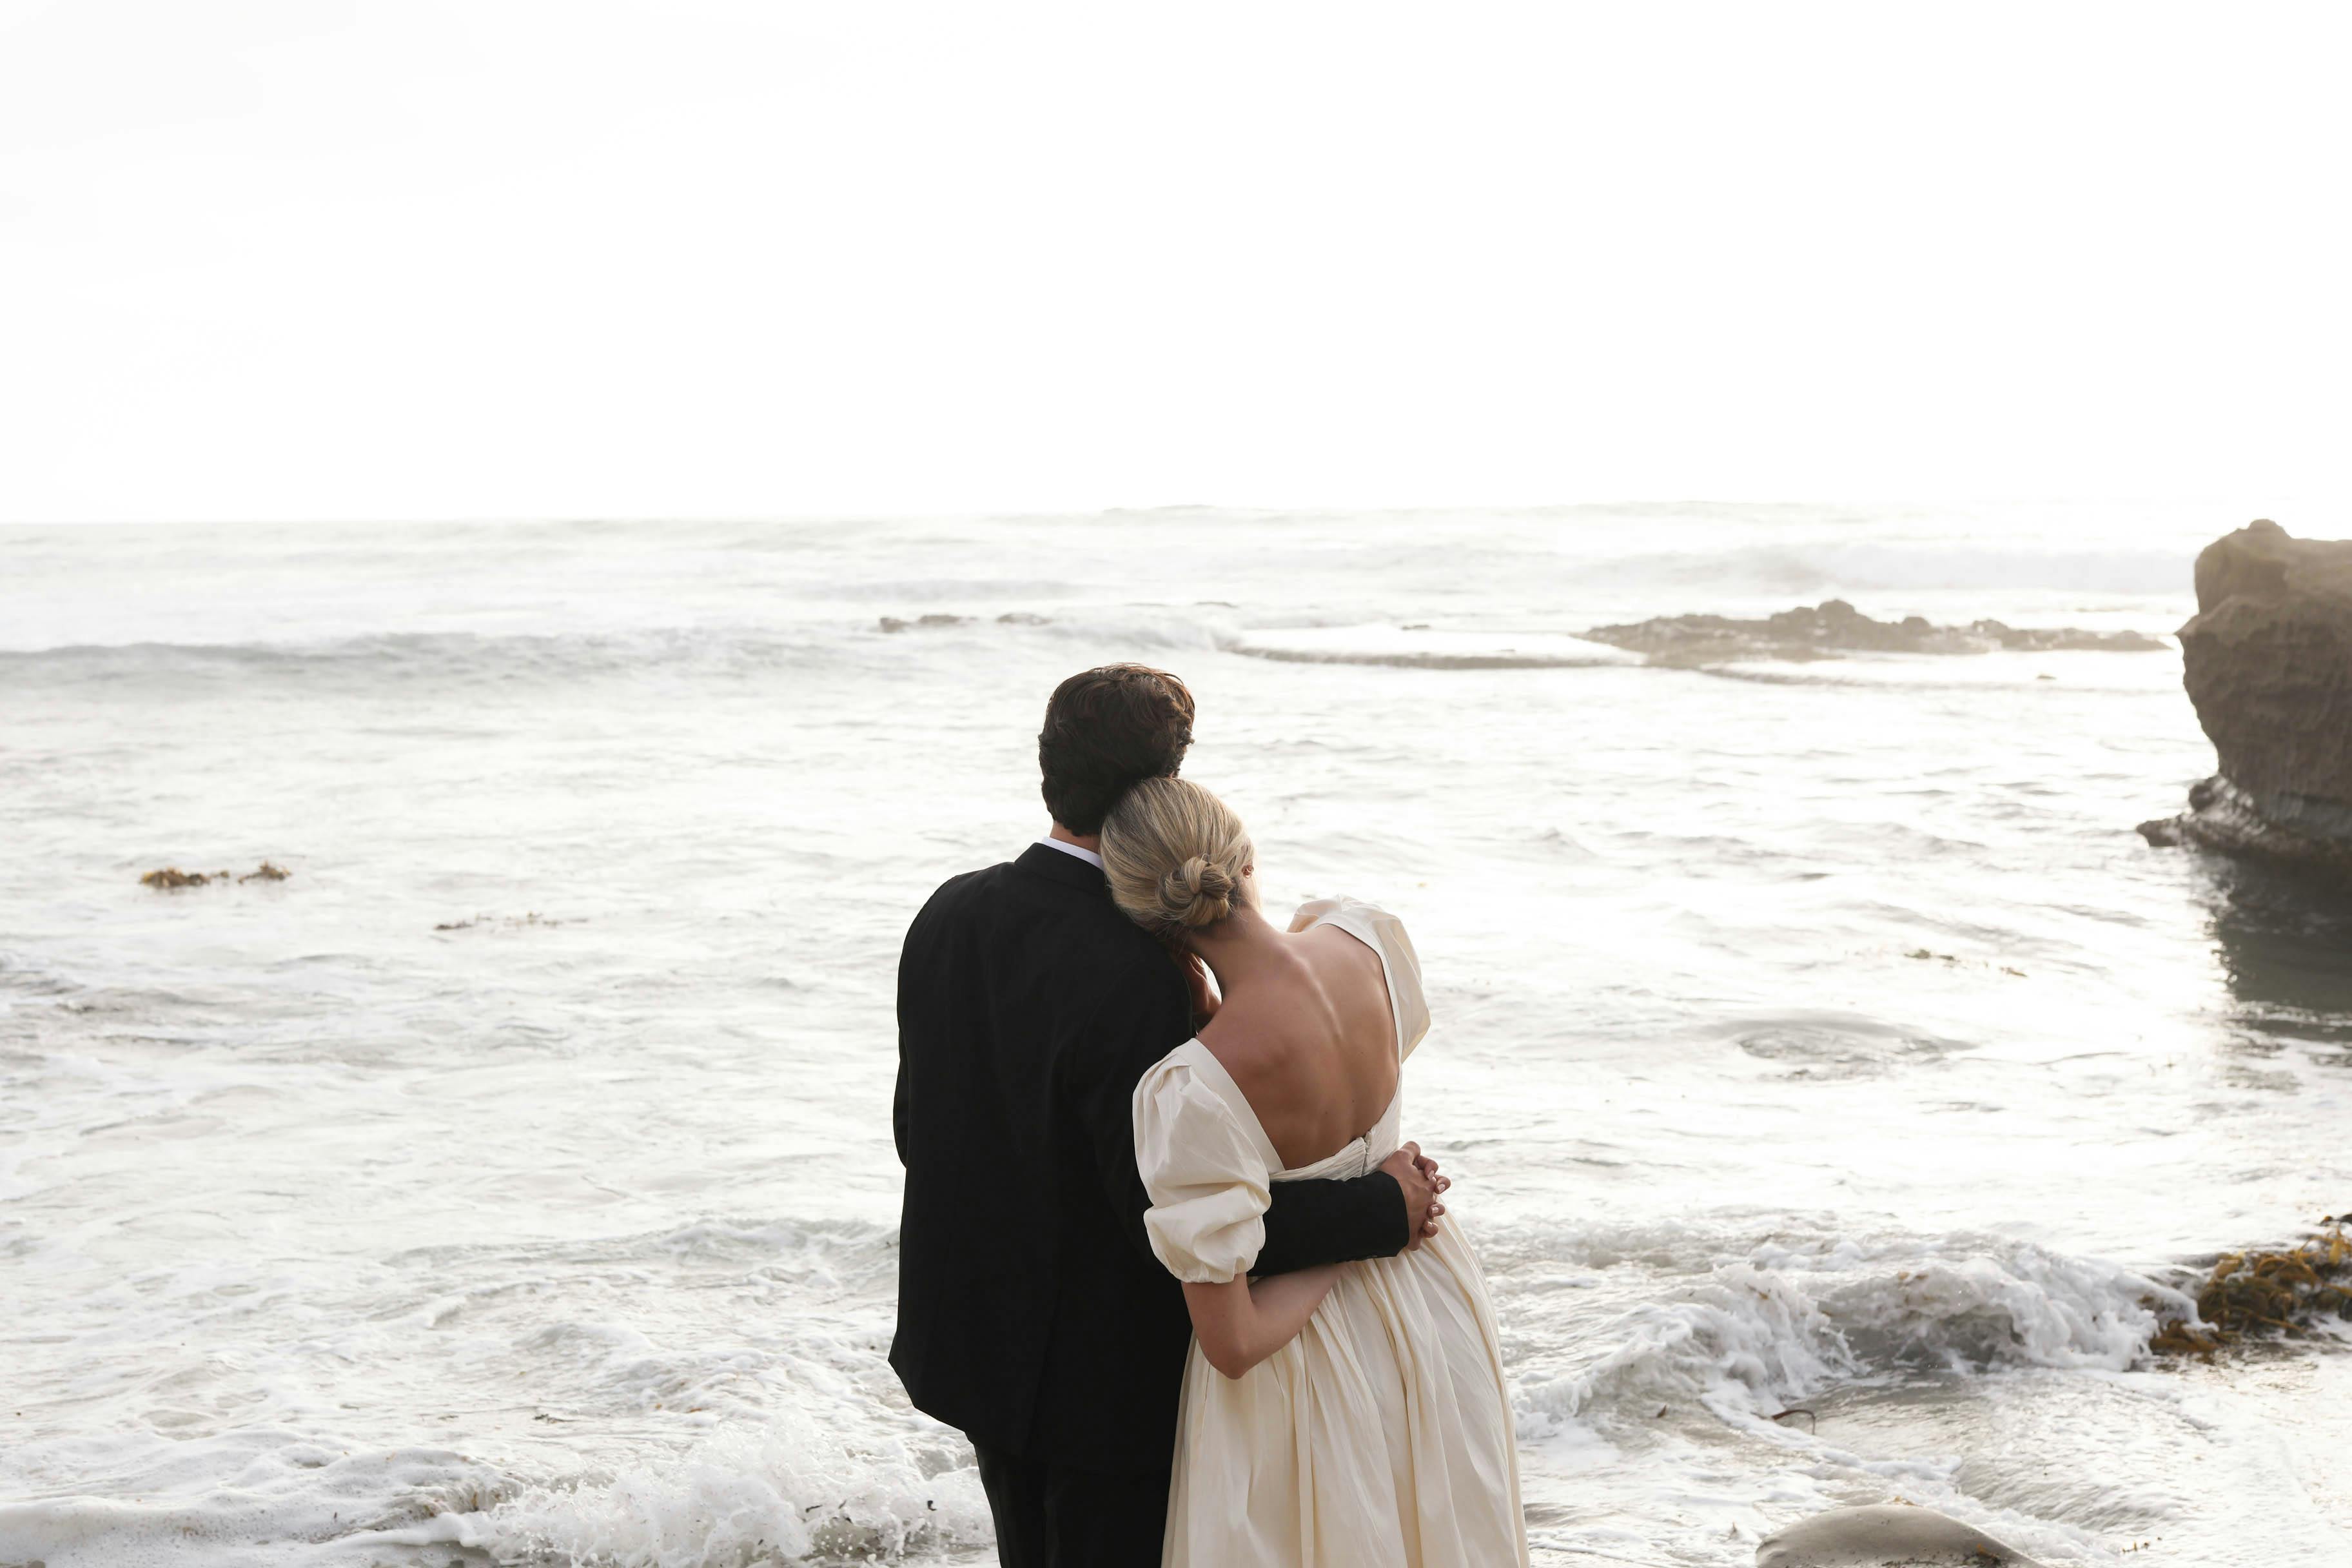 An image of a bride and groom standing on the beach and staring out at the ocean.